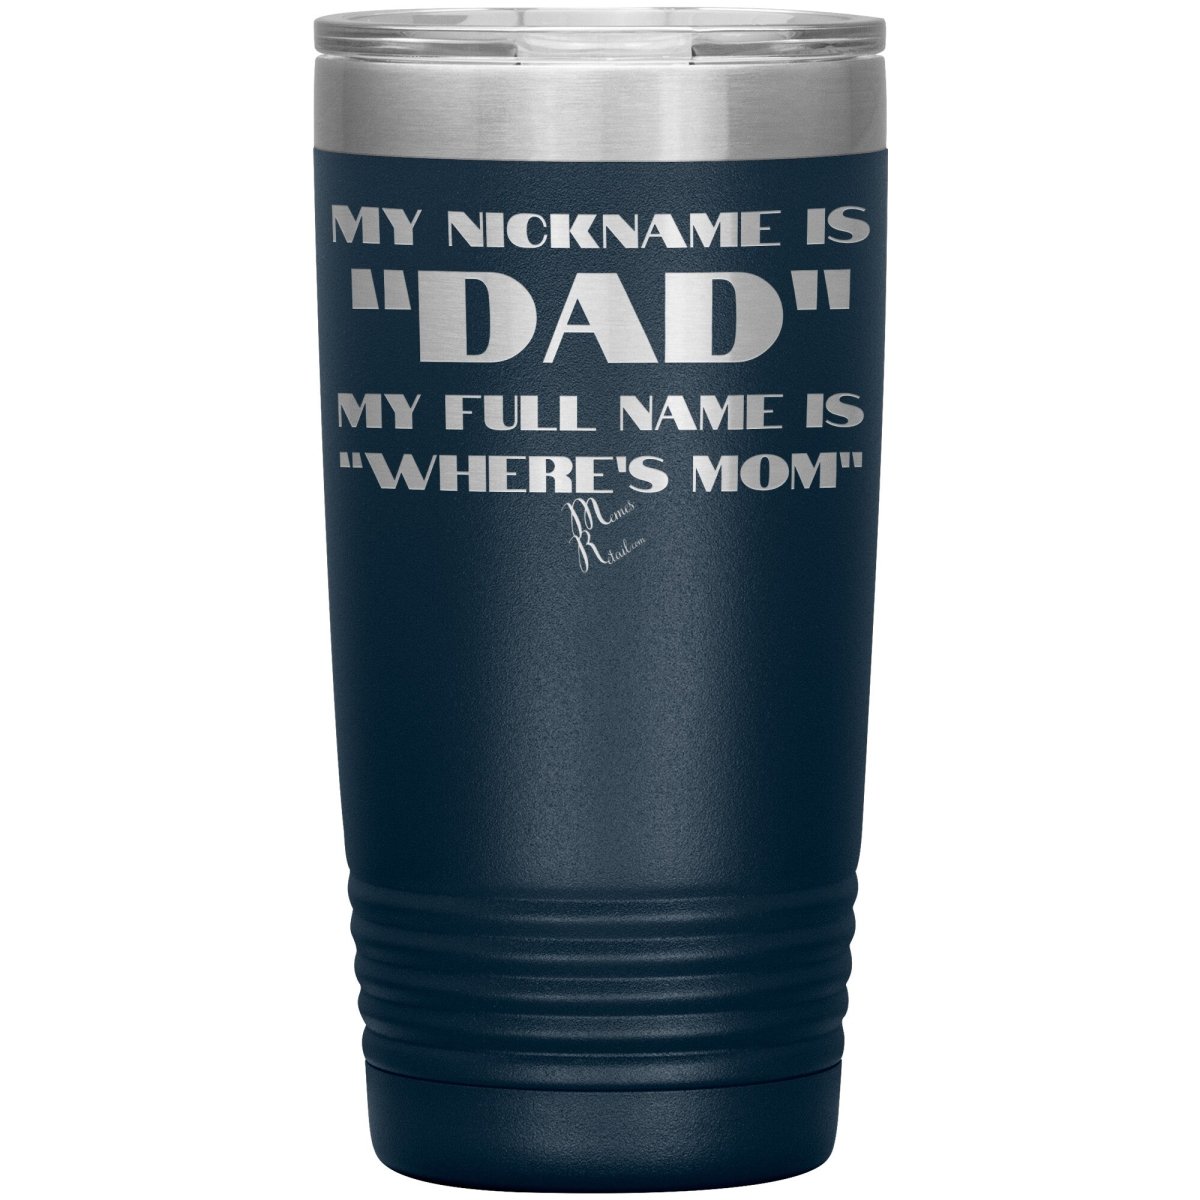 My Nickname is "Dad", My Full Name is "Where's Mom" Tumblers, 20oz Insulated Tumbler / Navy - MemesRetail.com